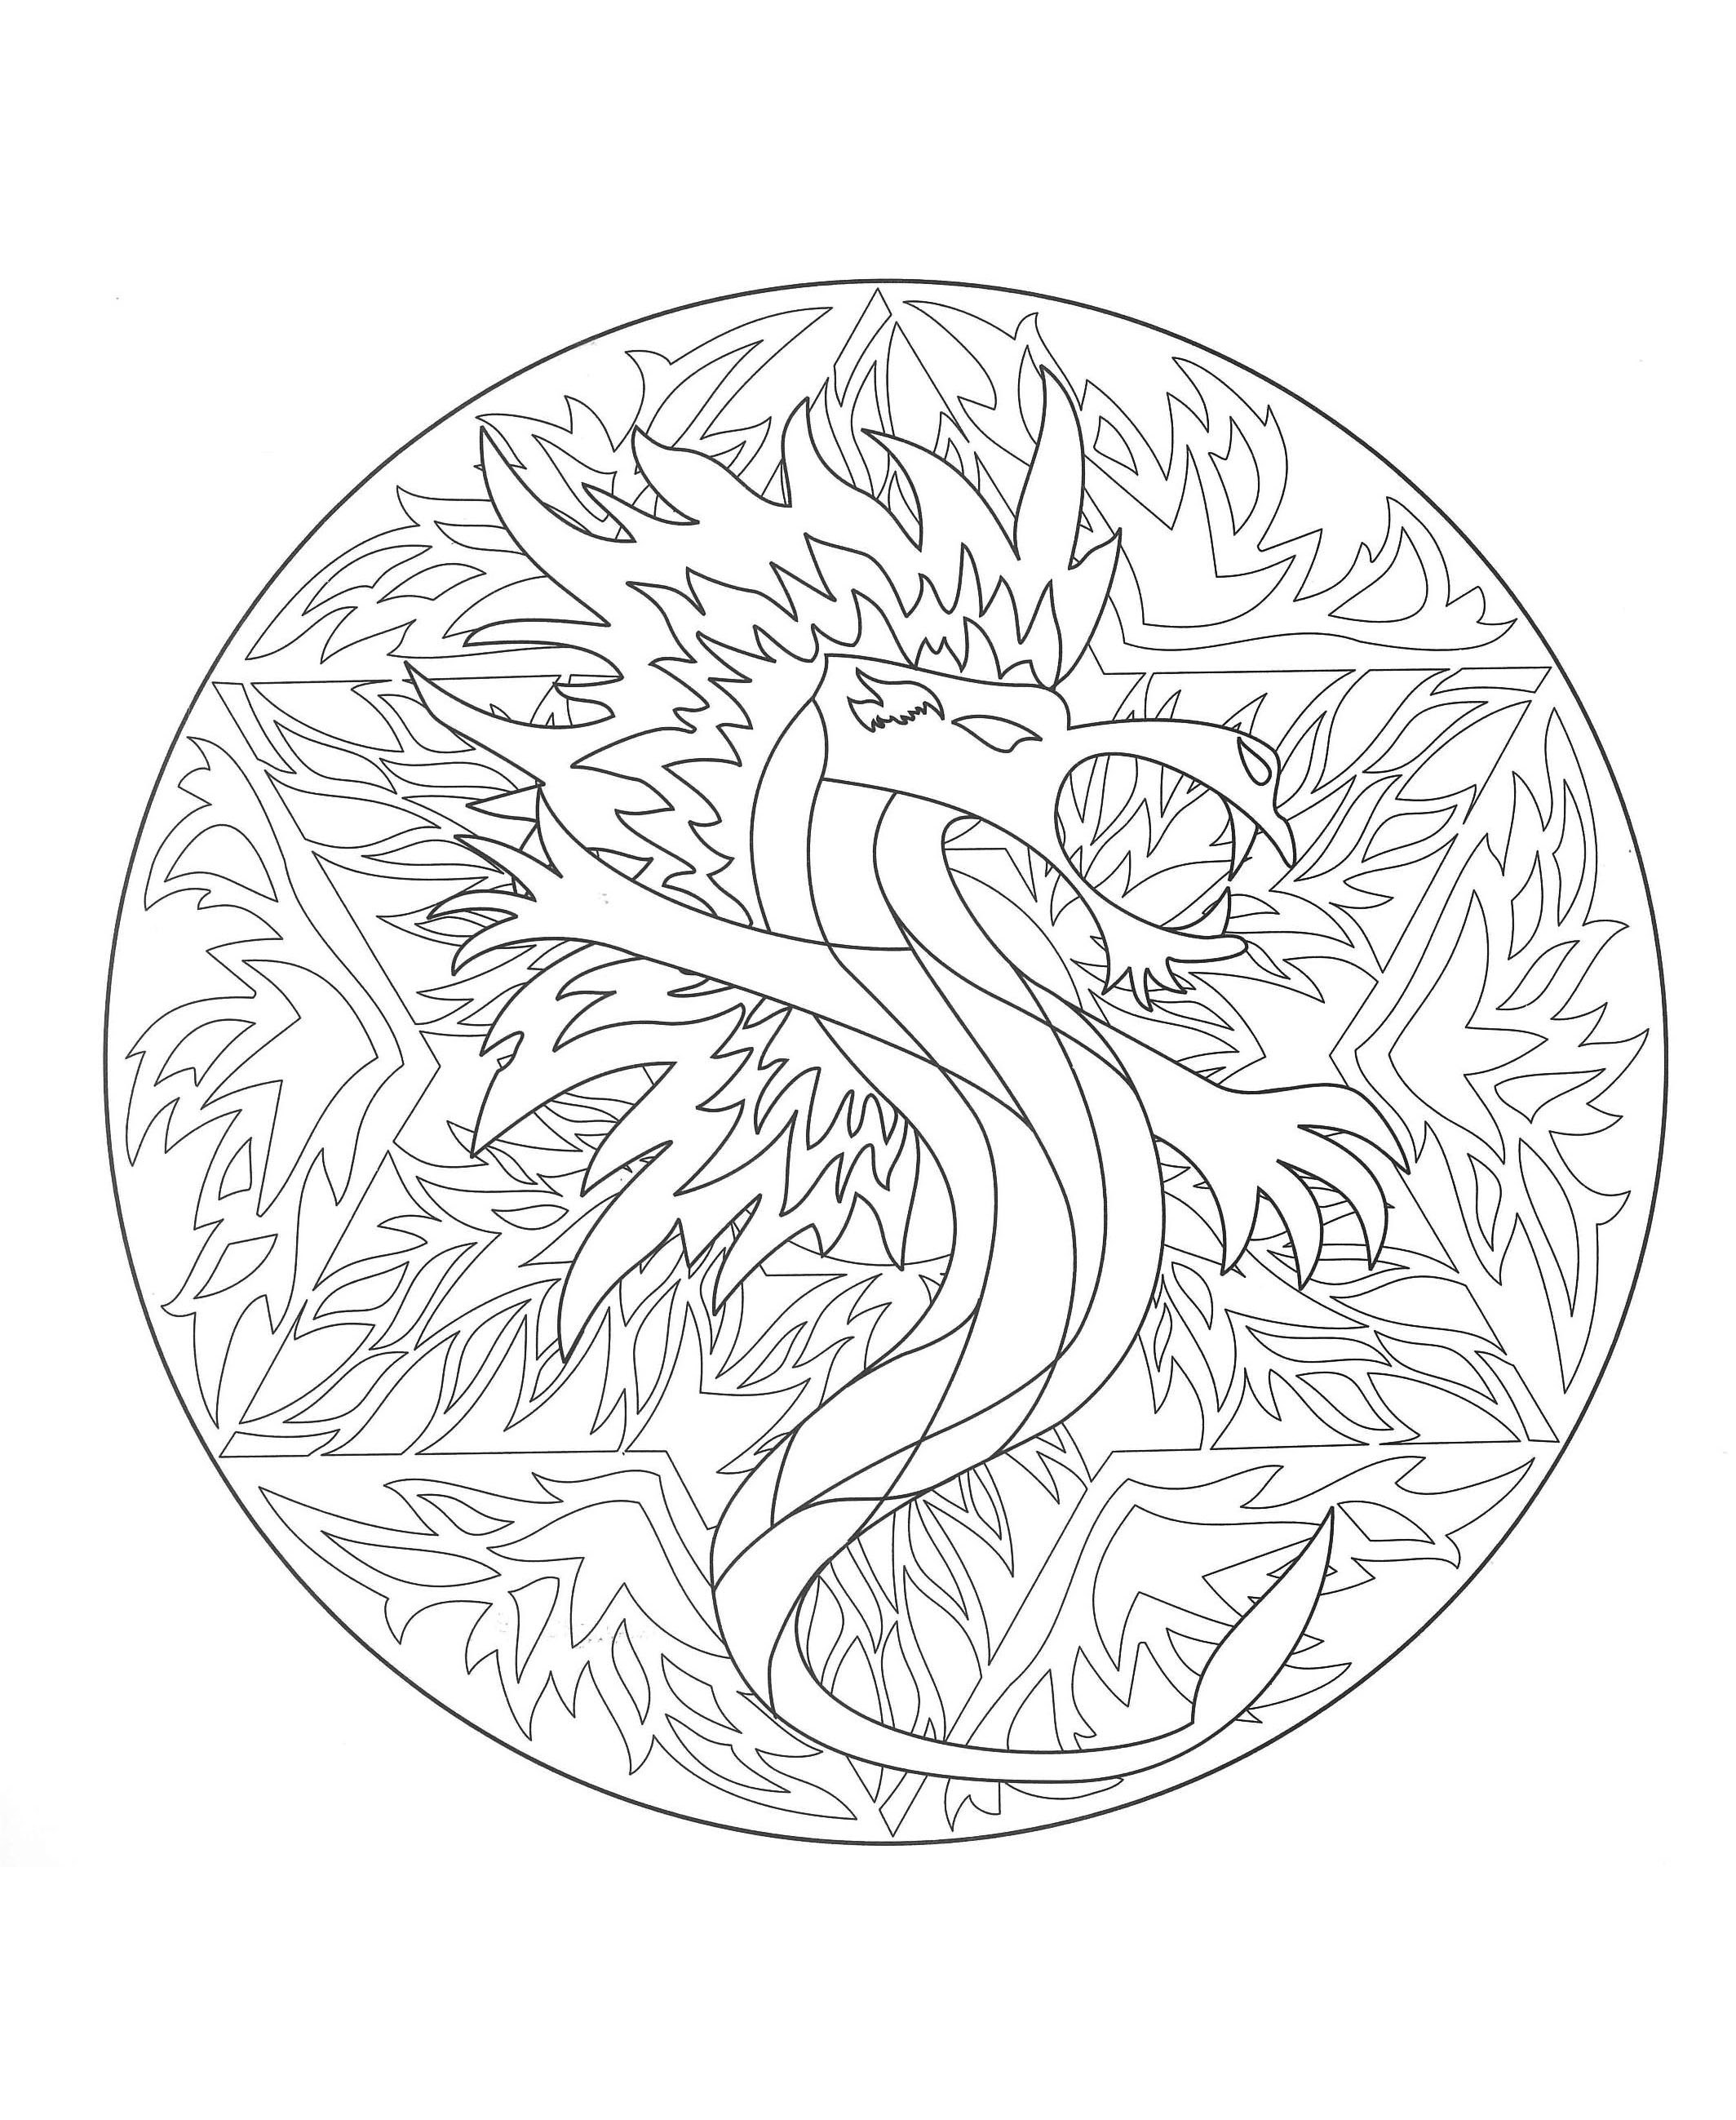 Free Dragon Mandala Coloring page. Prepare your pens and pencils to color this Mandala full of small details and intricate areas. Feel free to let your instincts decide where to color, and what colors to choose.